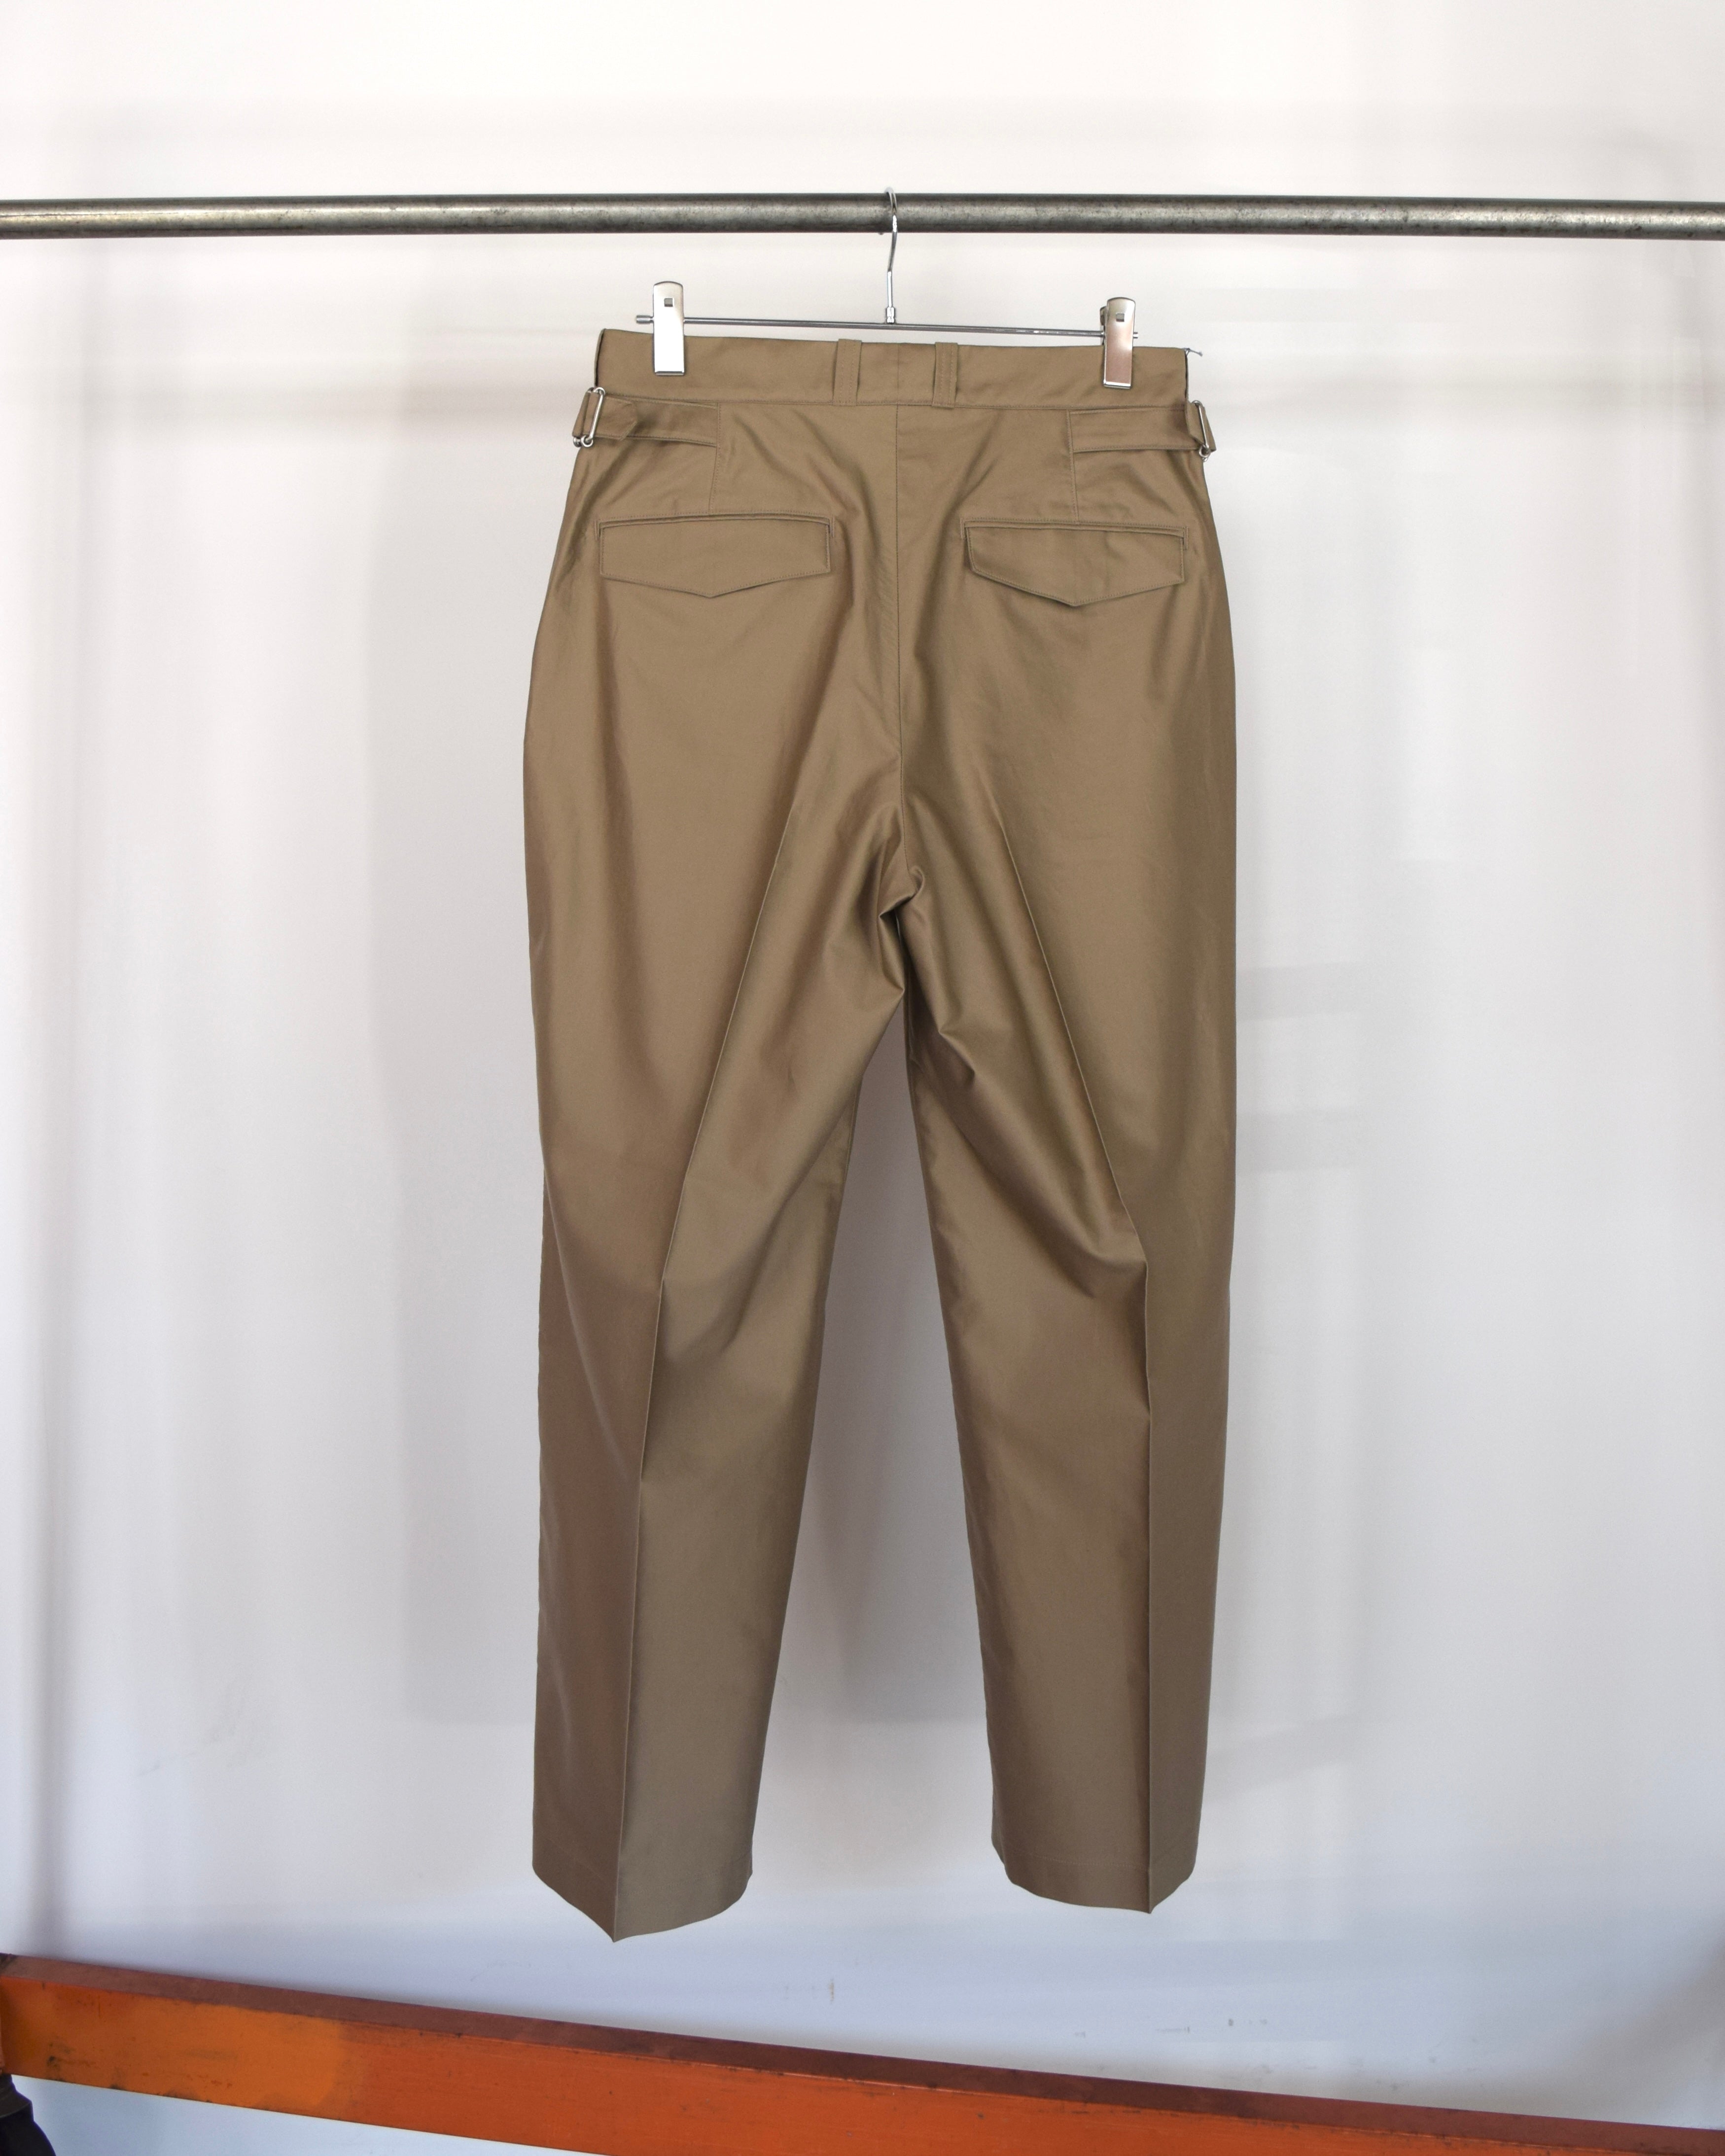 1000s thousands / GM SERVICE TROUSERS - STONE BROWN